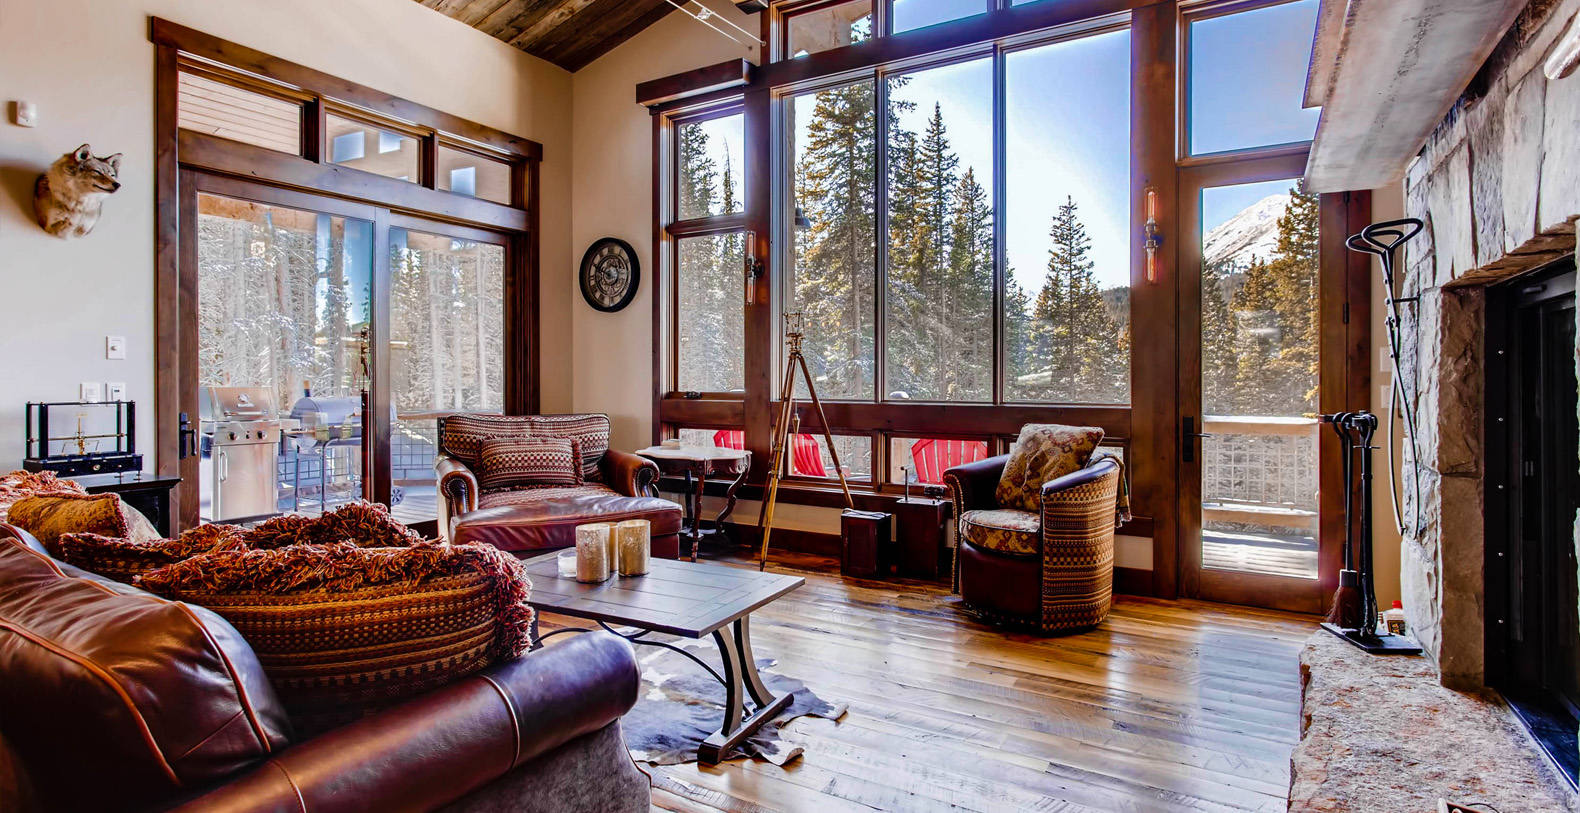 41 Top Pictures Barn Rentals Colorado / Inviting ranch style home offers rustic warmth in the ...